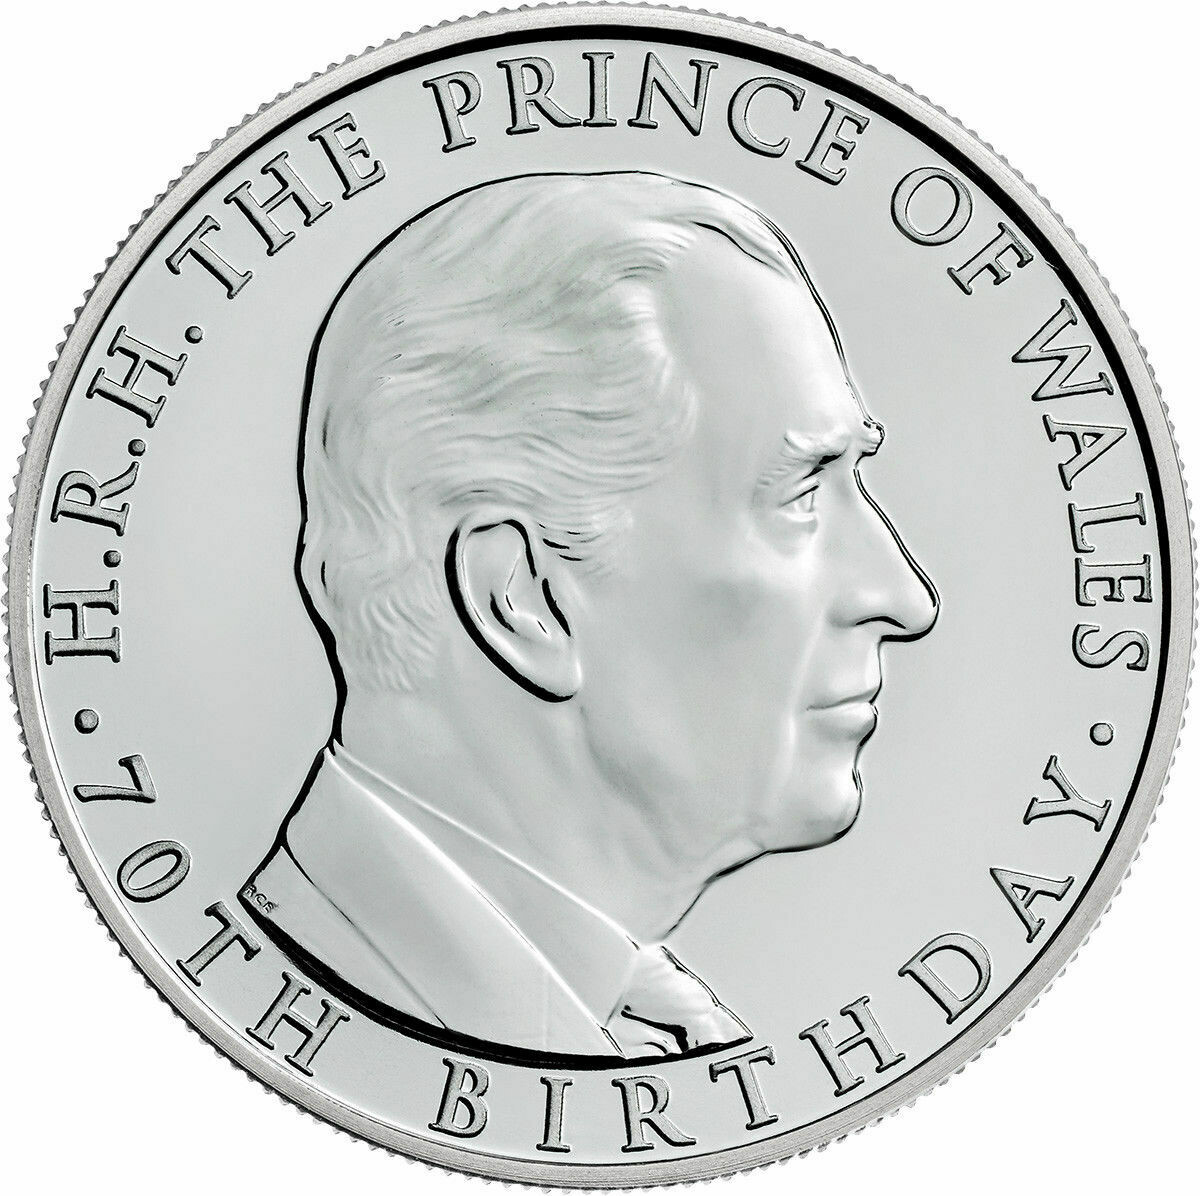 2018 Prince Charles of Wales £5 Brilliant Uncirculated Coin